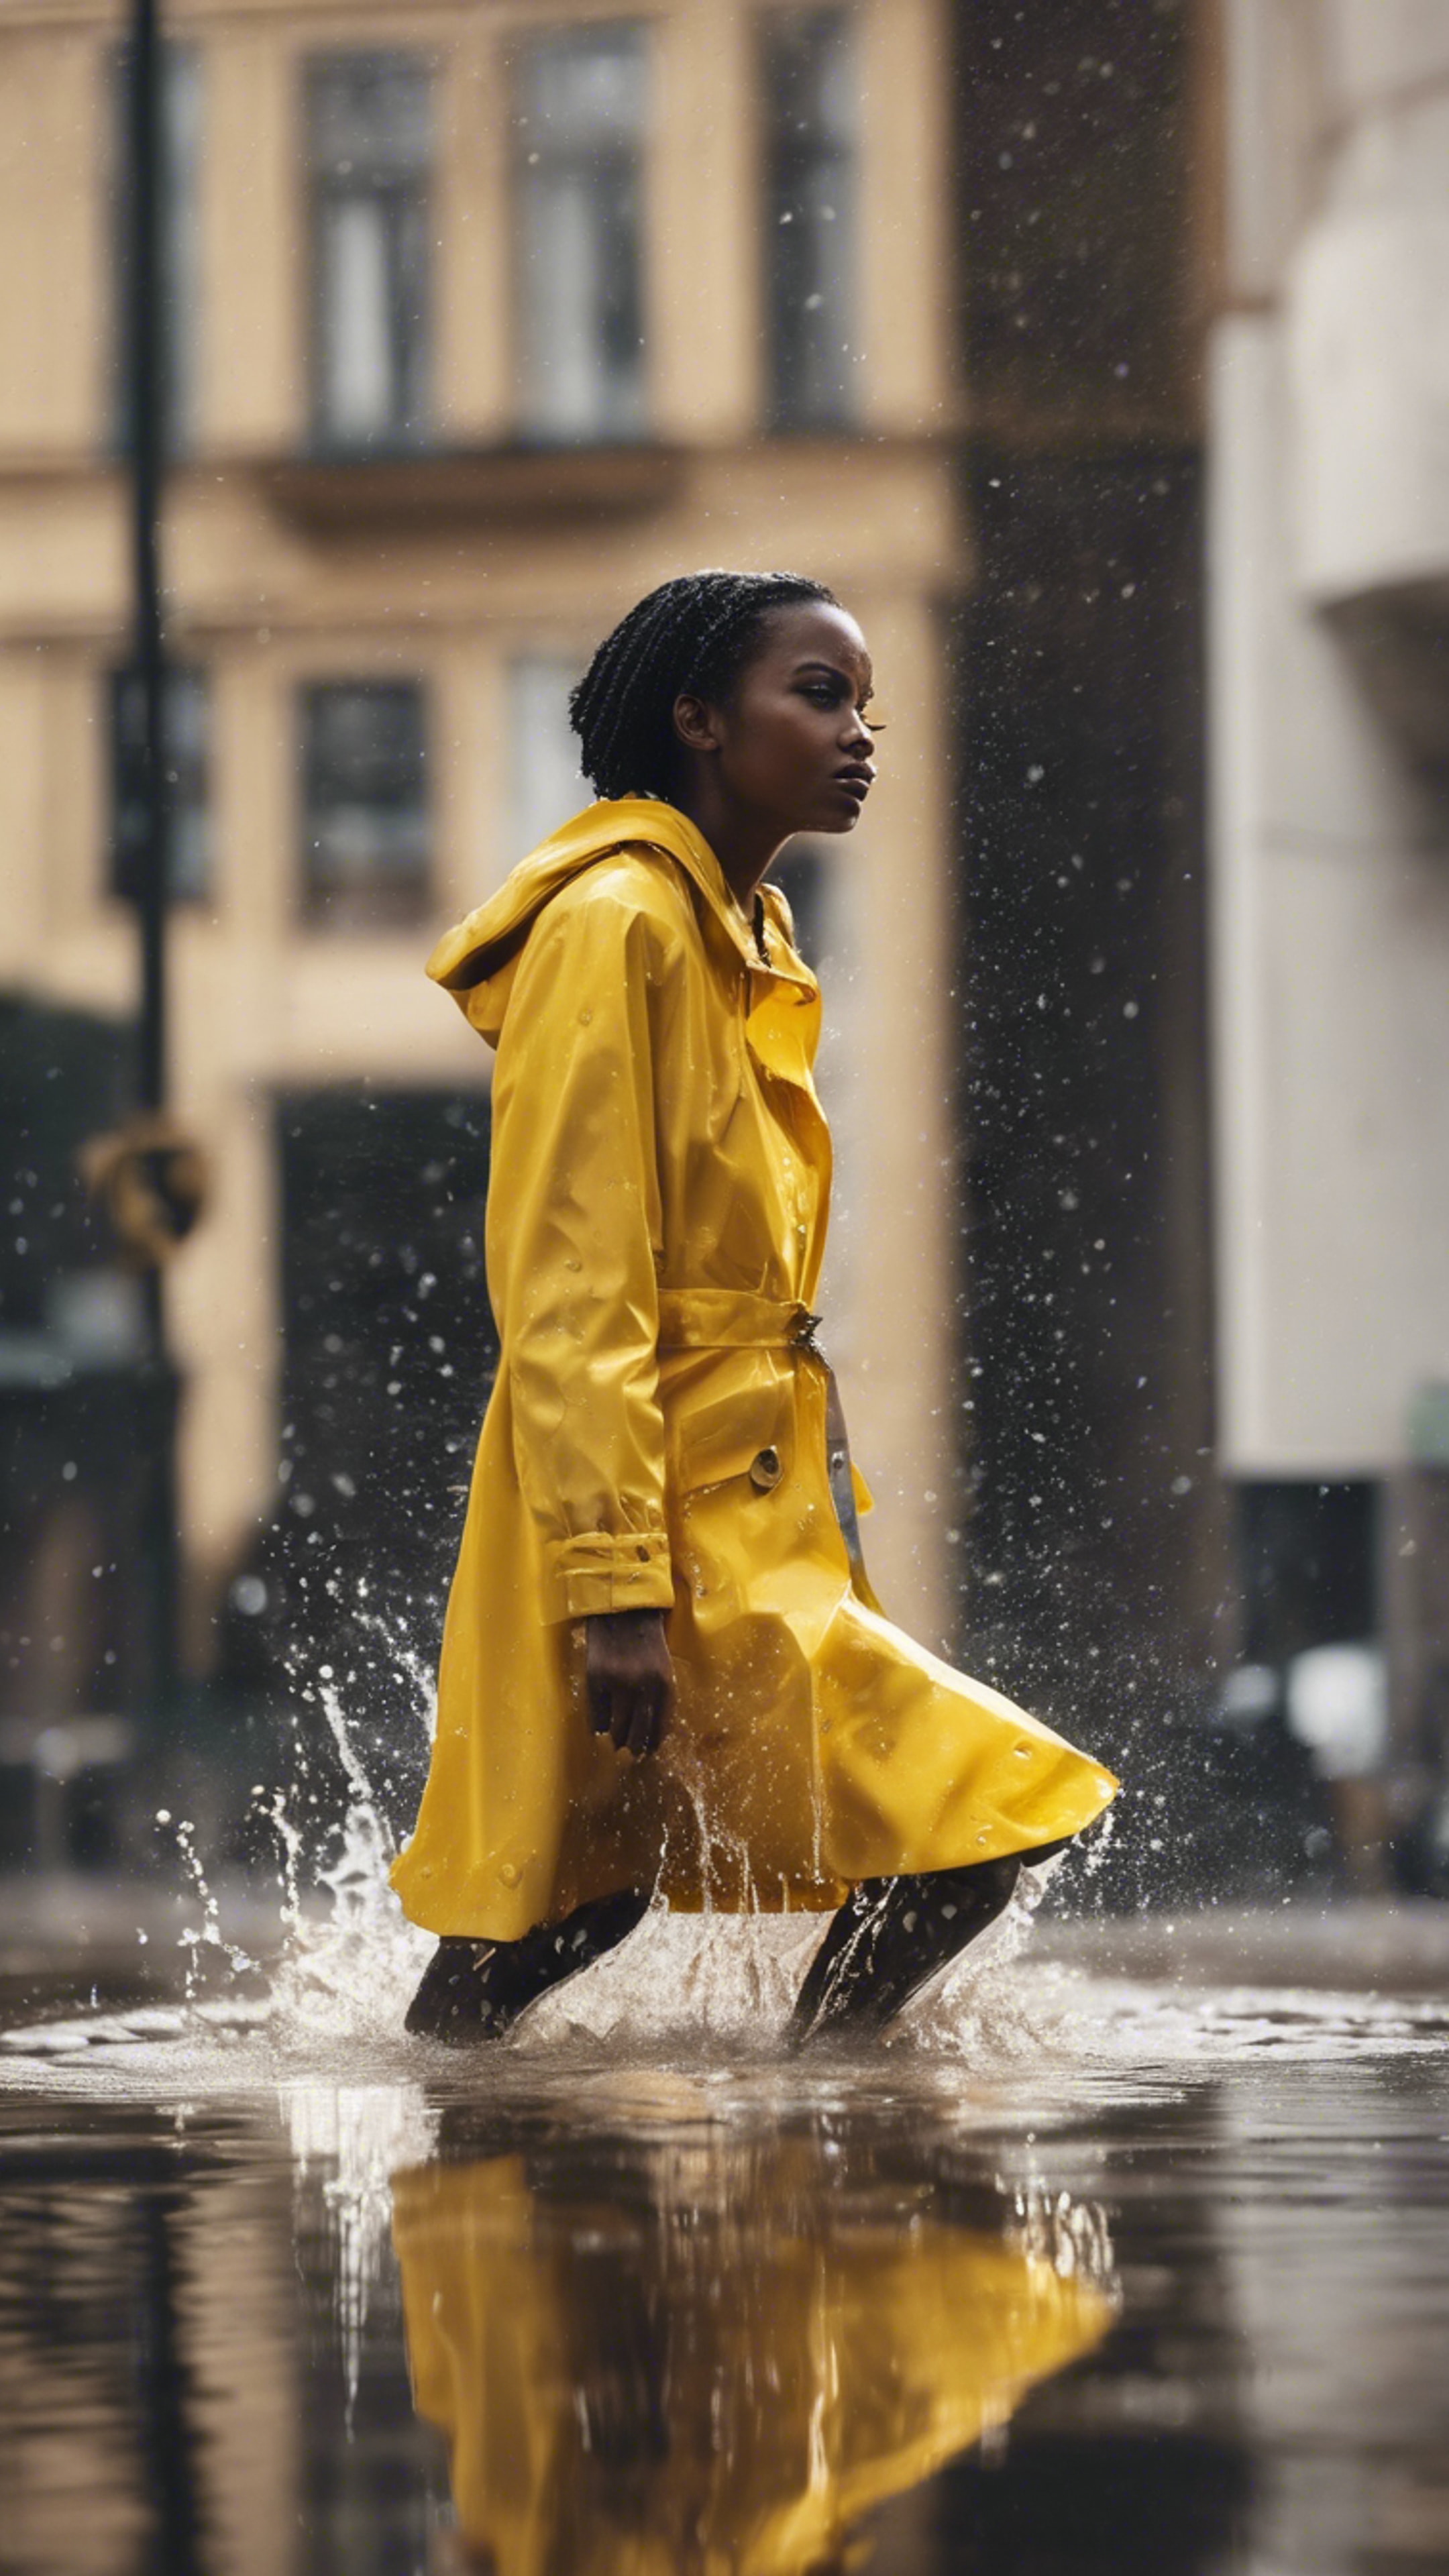 A black girl in a bright yellow raincoat splashing water in puddles after a heavy rain. Tapet[a80398e4c066404db875]